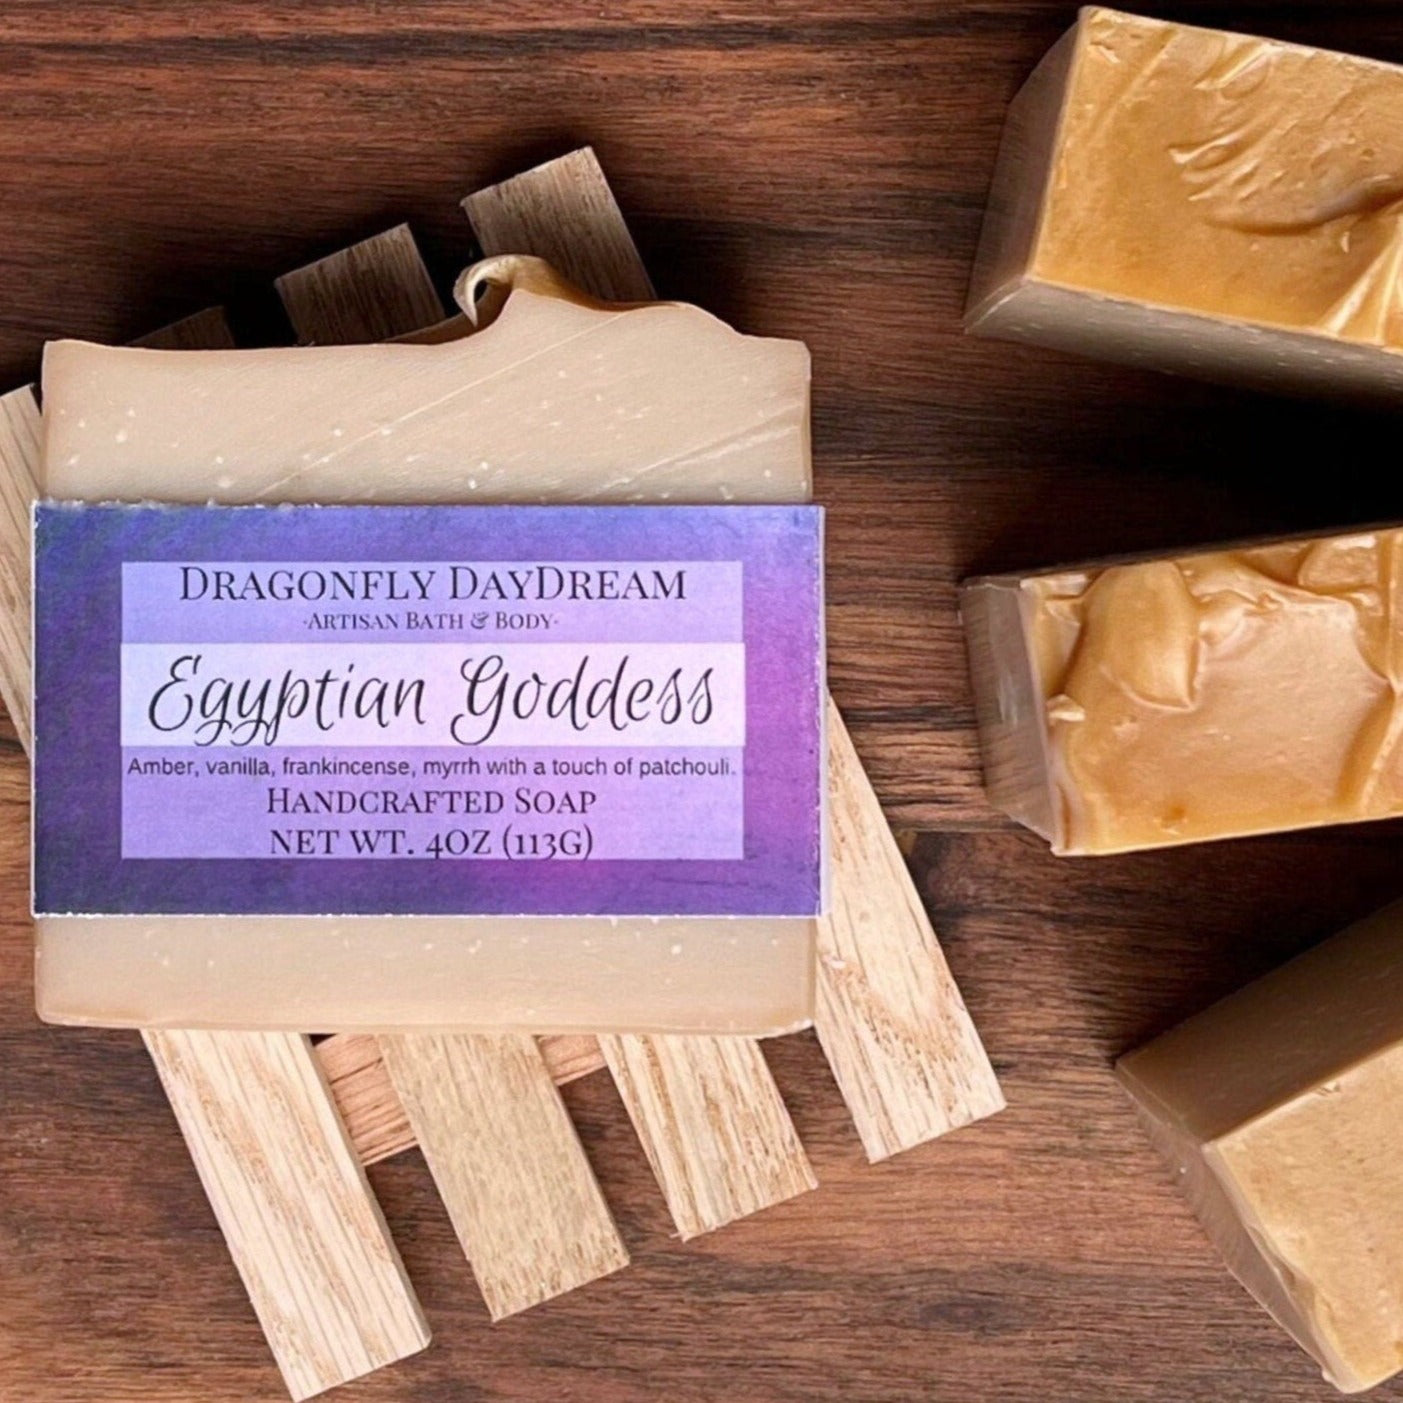 Tan Egyptian Goddess soap labeled with a purple tag, resting on a recycled wood soap tray atop a dark brown table. To the right, three additional Egyptian Goddess soaps are displayed from a top view.